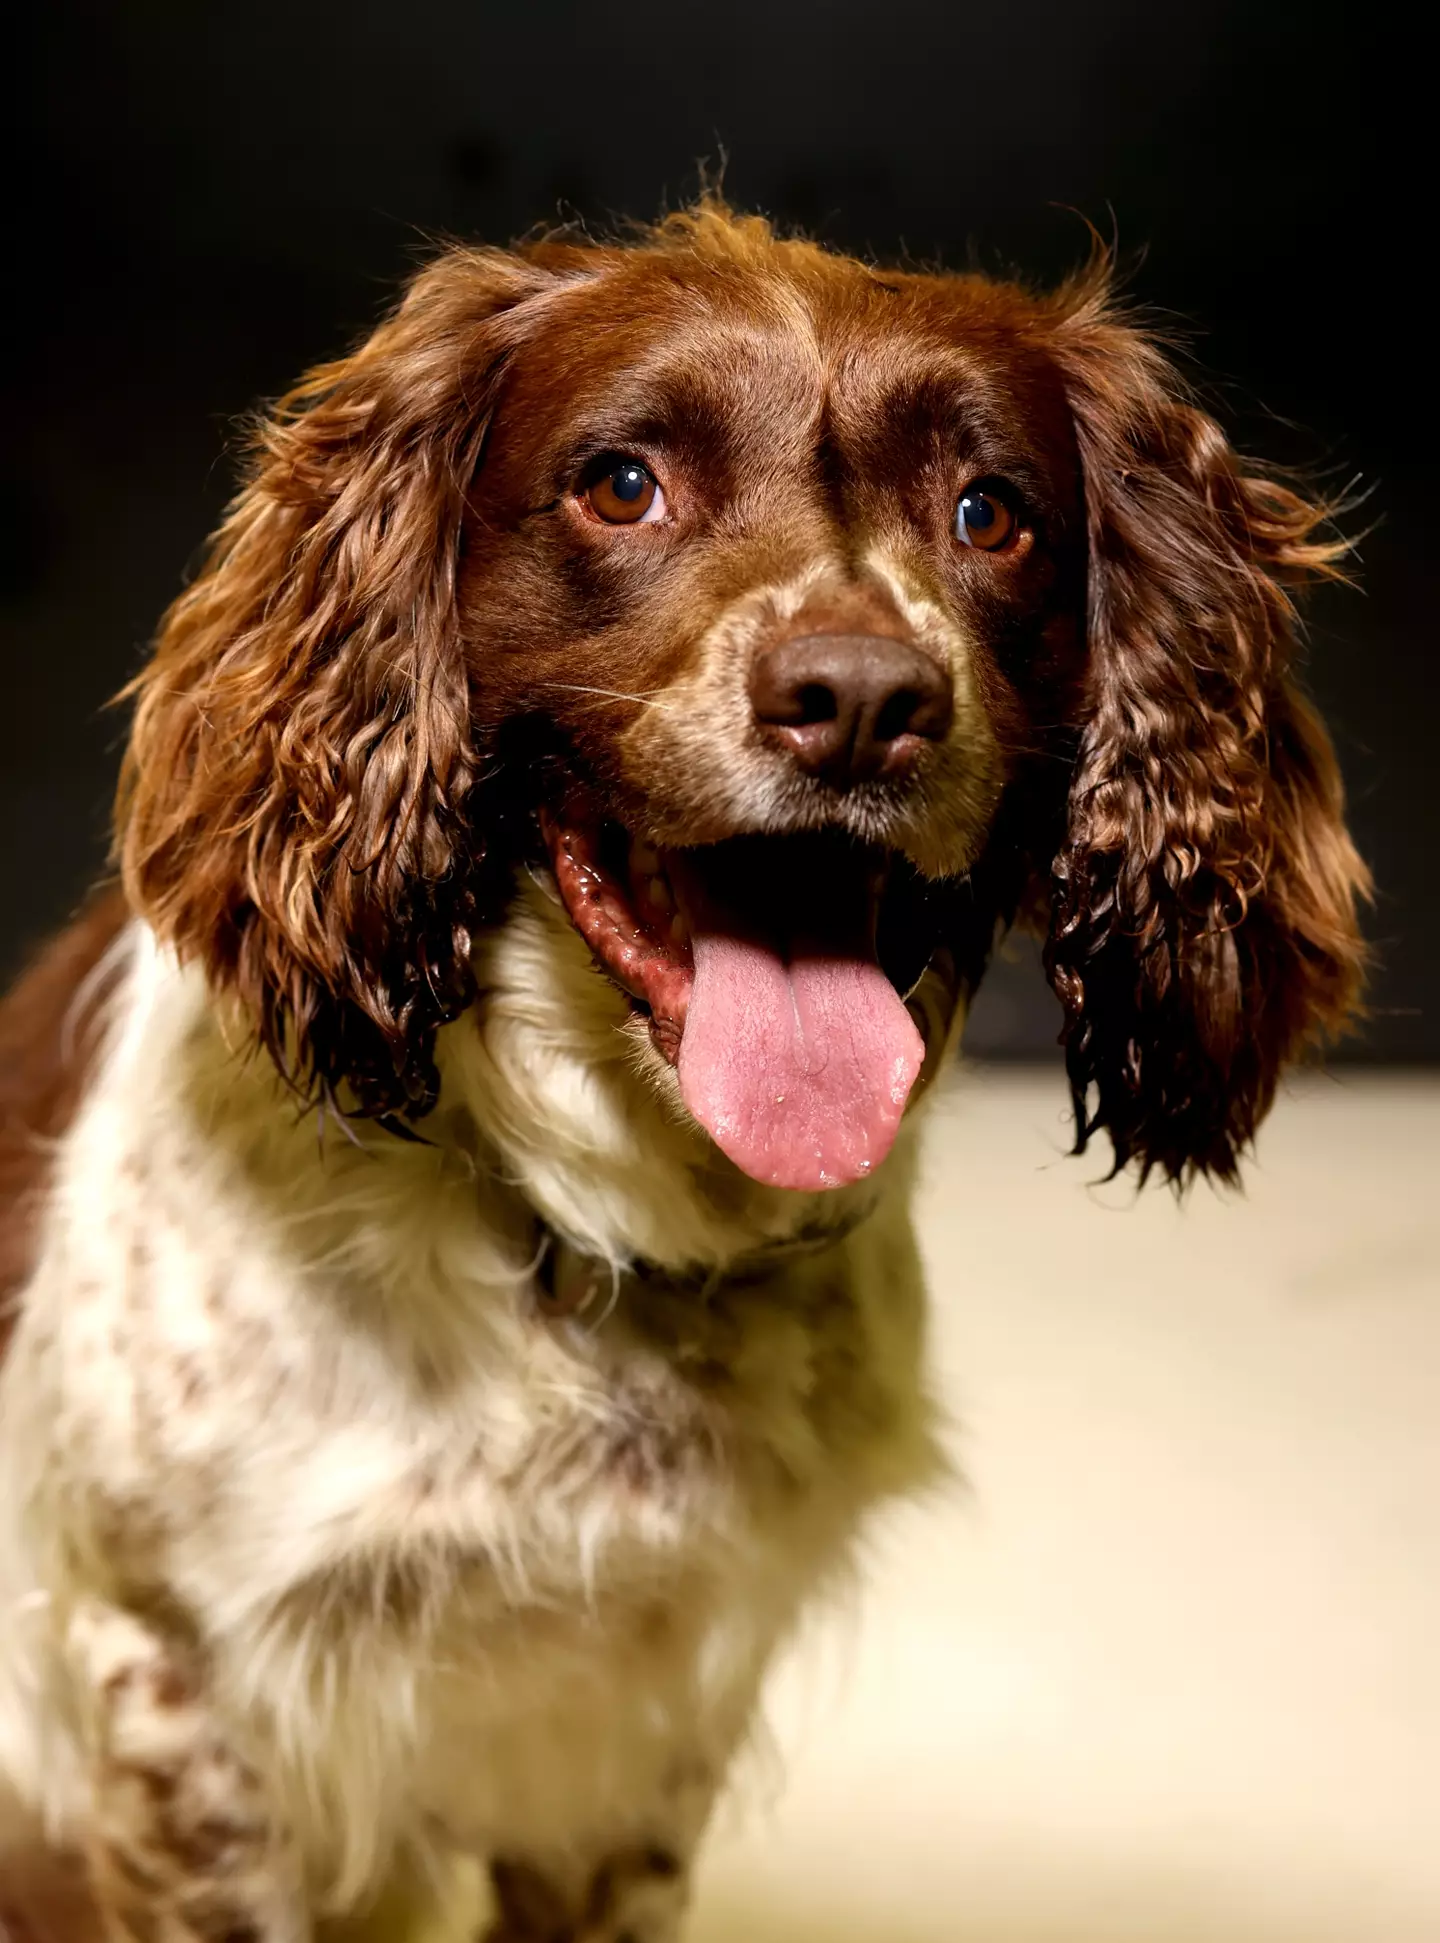 Spaniels could be the unlikely saviour of the bed bug crisis.